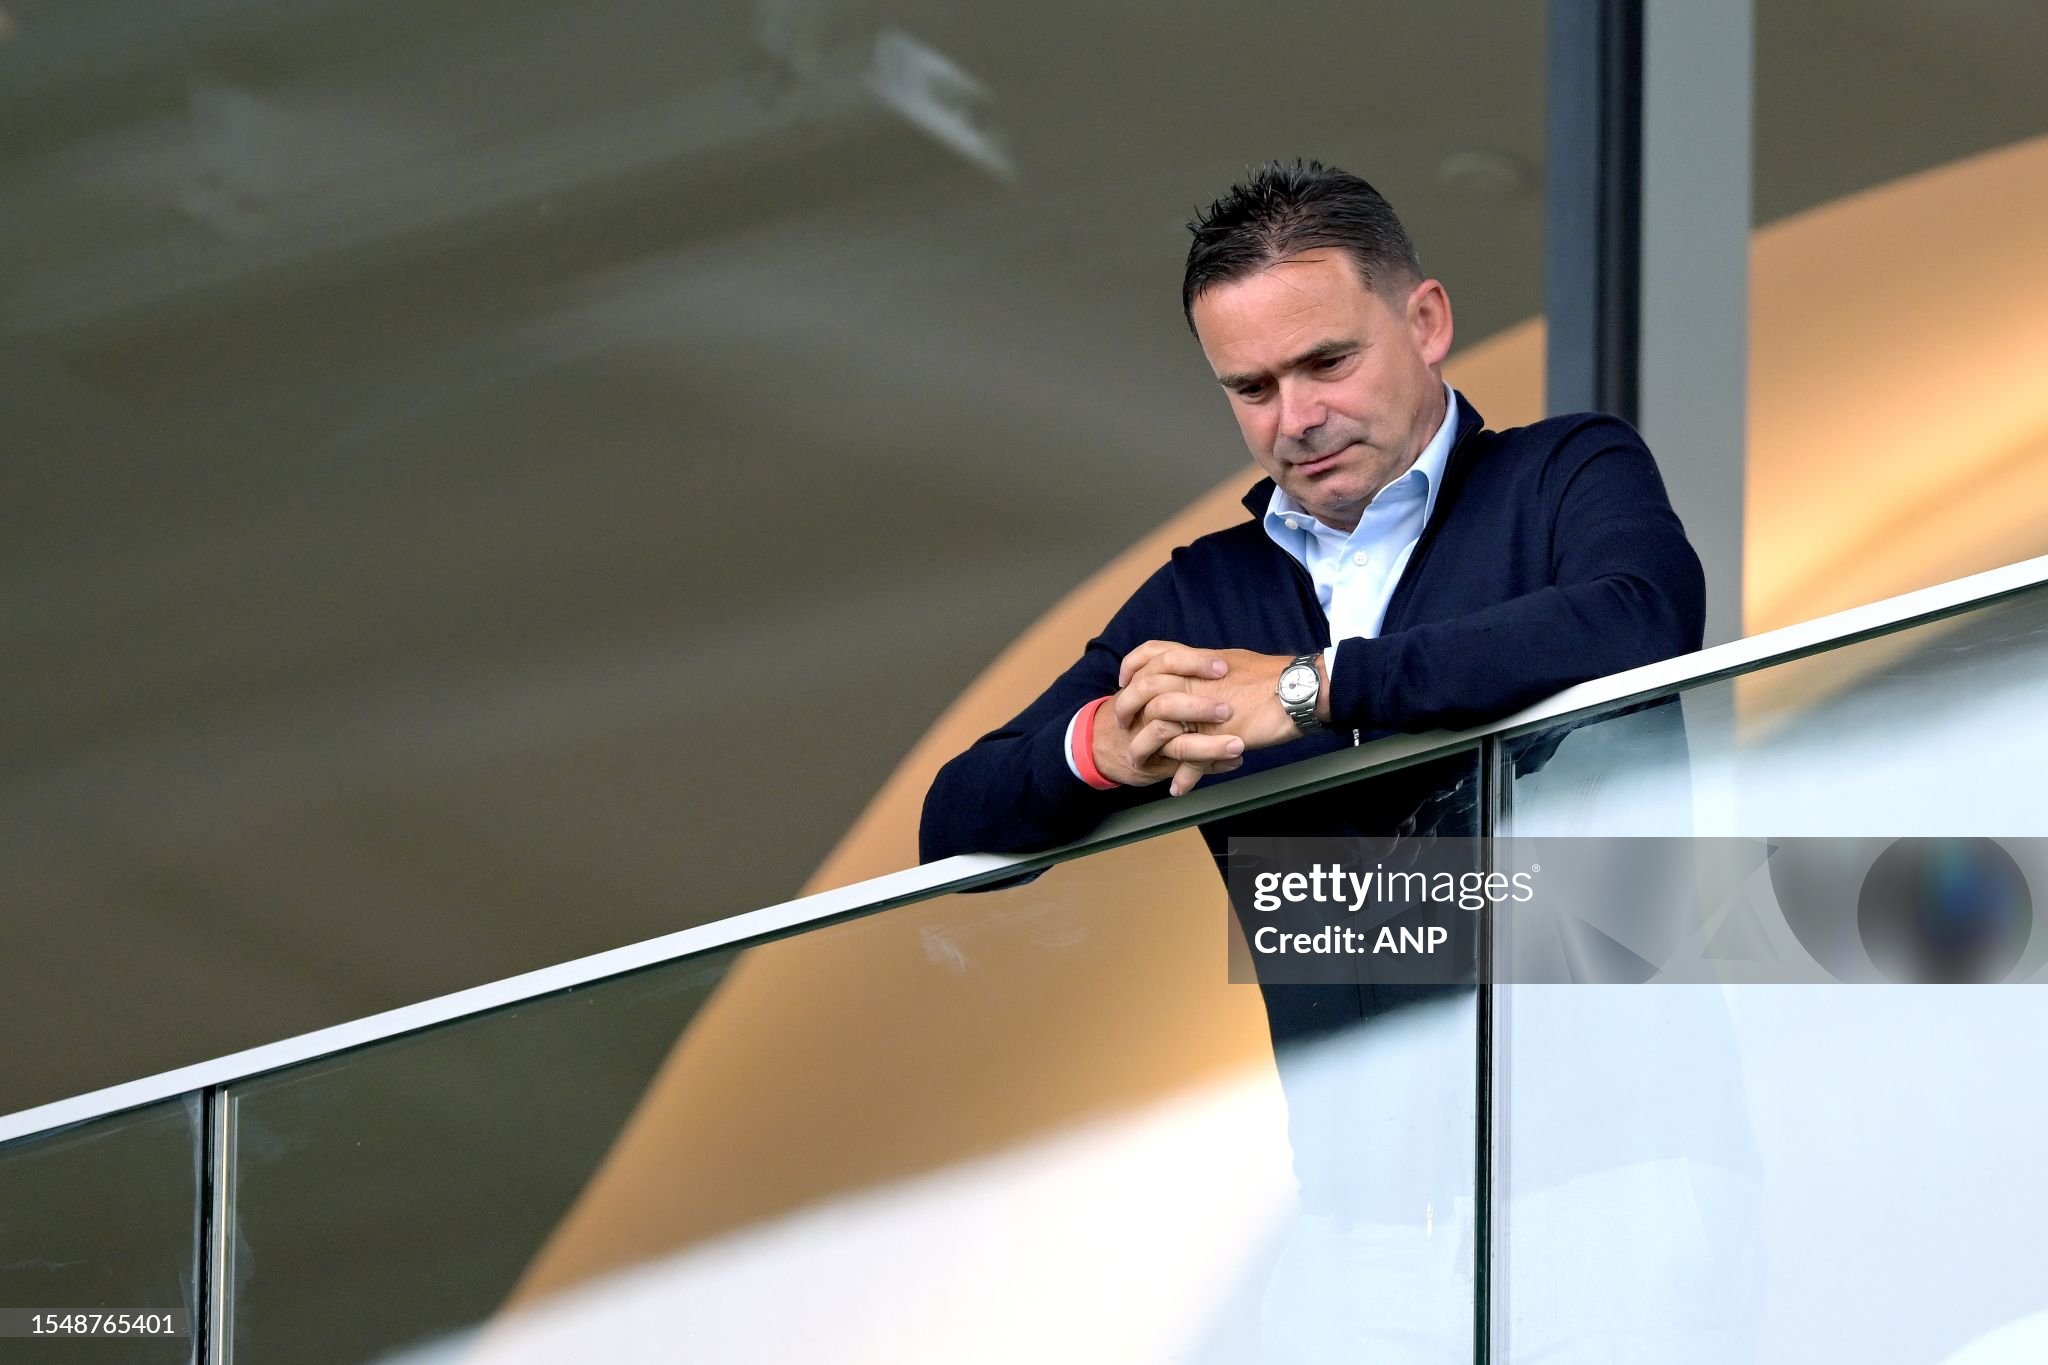 Overmars suspended for a year due to inappropriate behavior